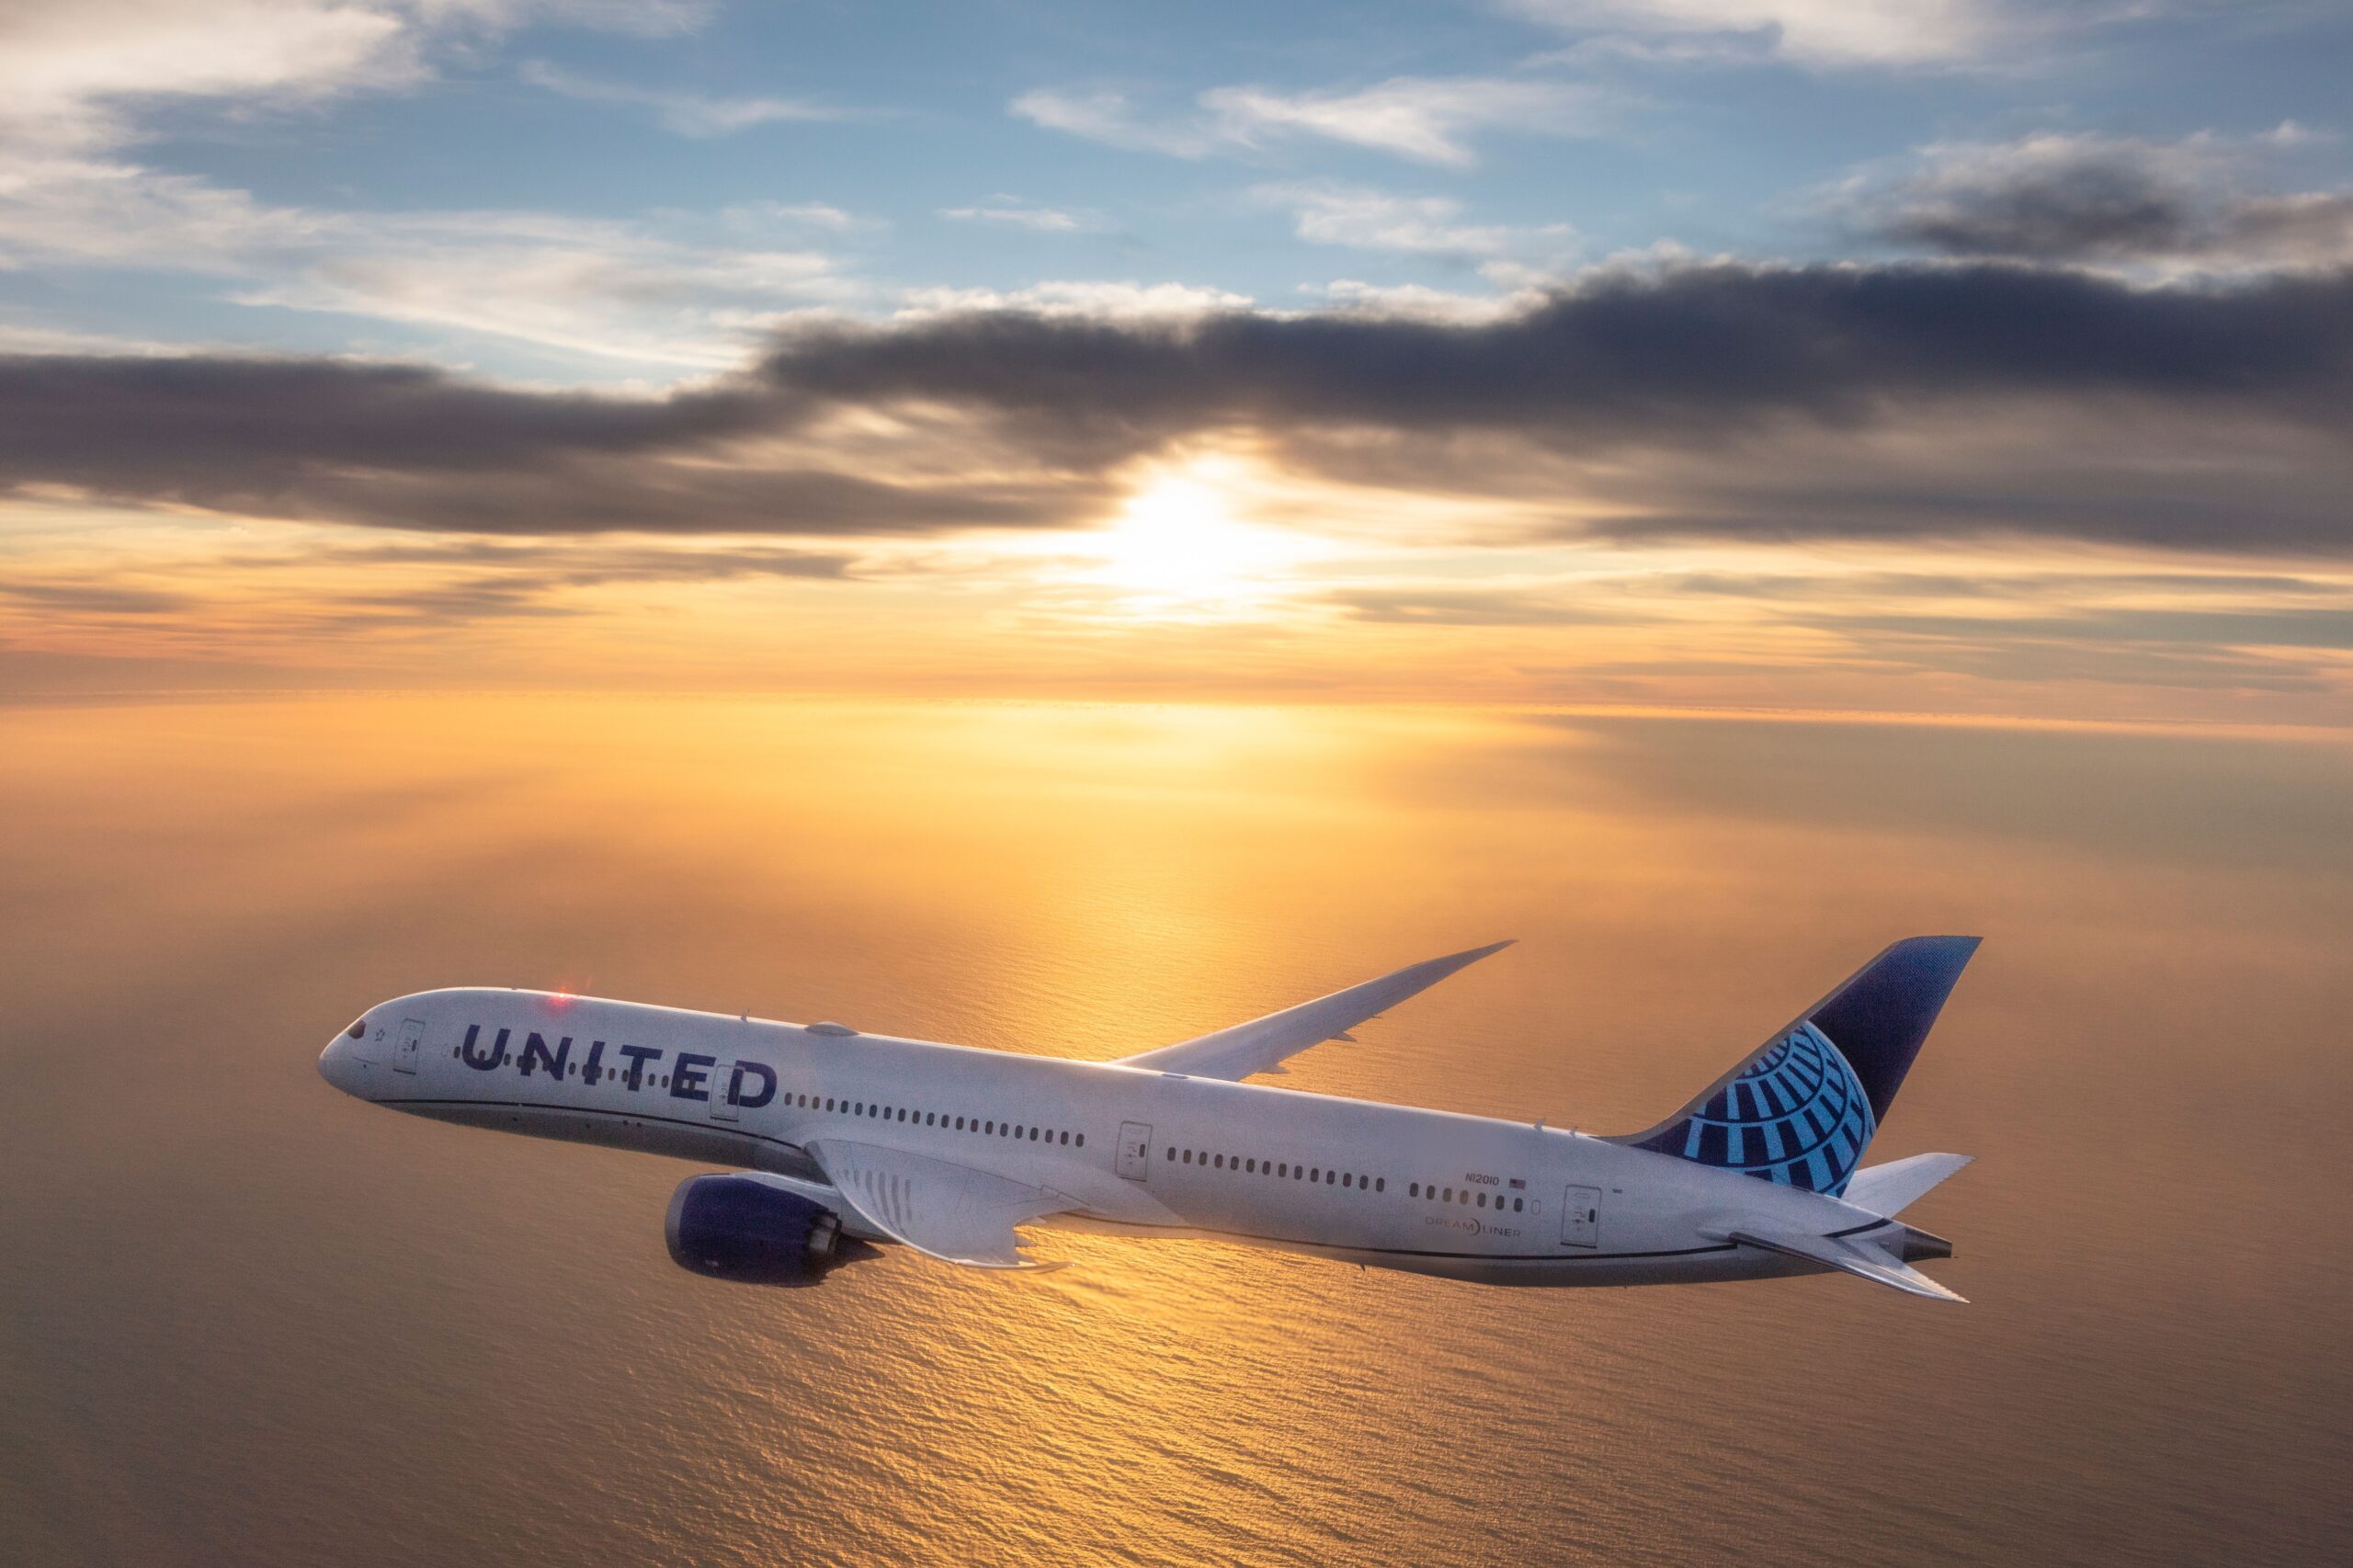 Photo of: United Airlines Boeing 787-9 Dreamliner // United Airlines